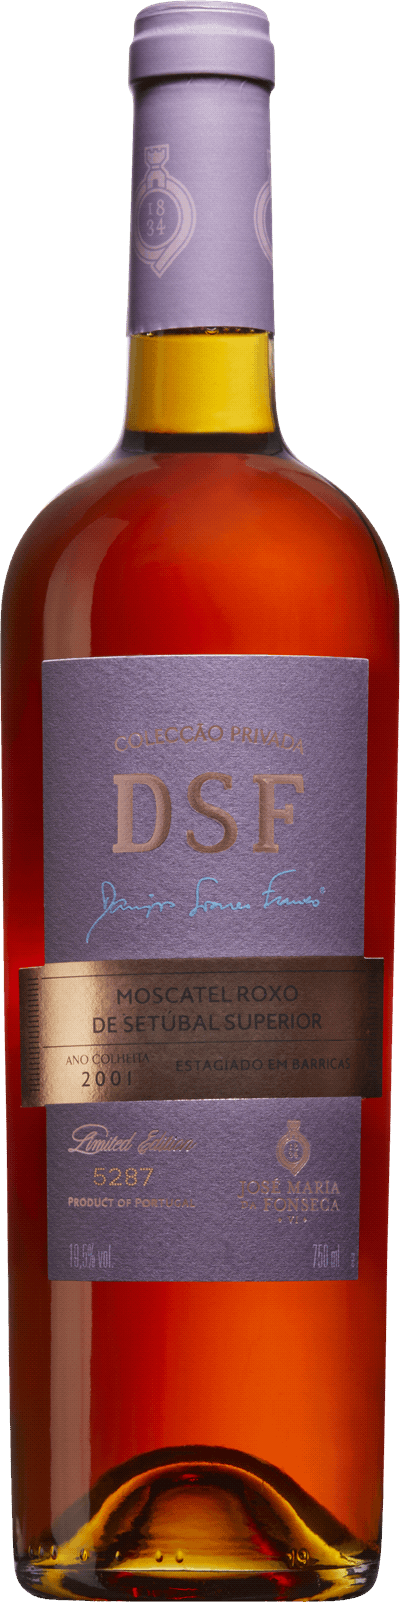 DSF Collection Moscatel 2001 Setùbal de Roxo Systembolaget | Superior